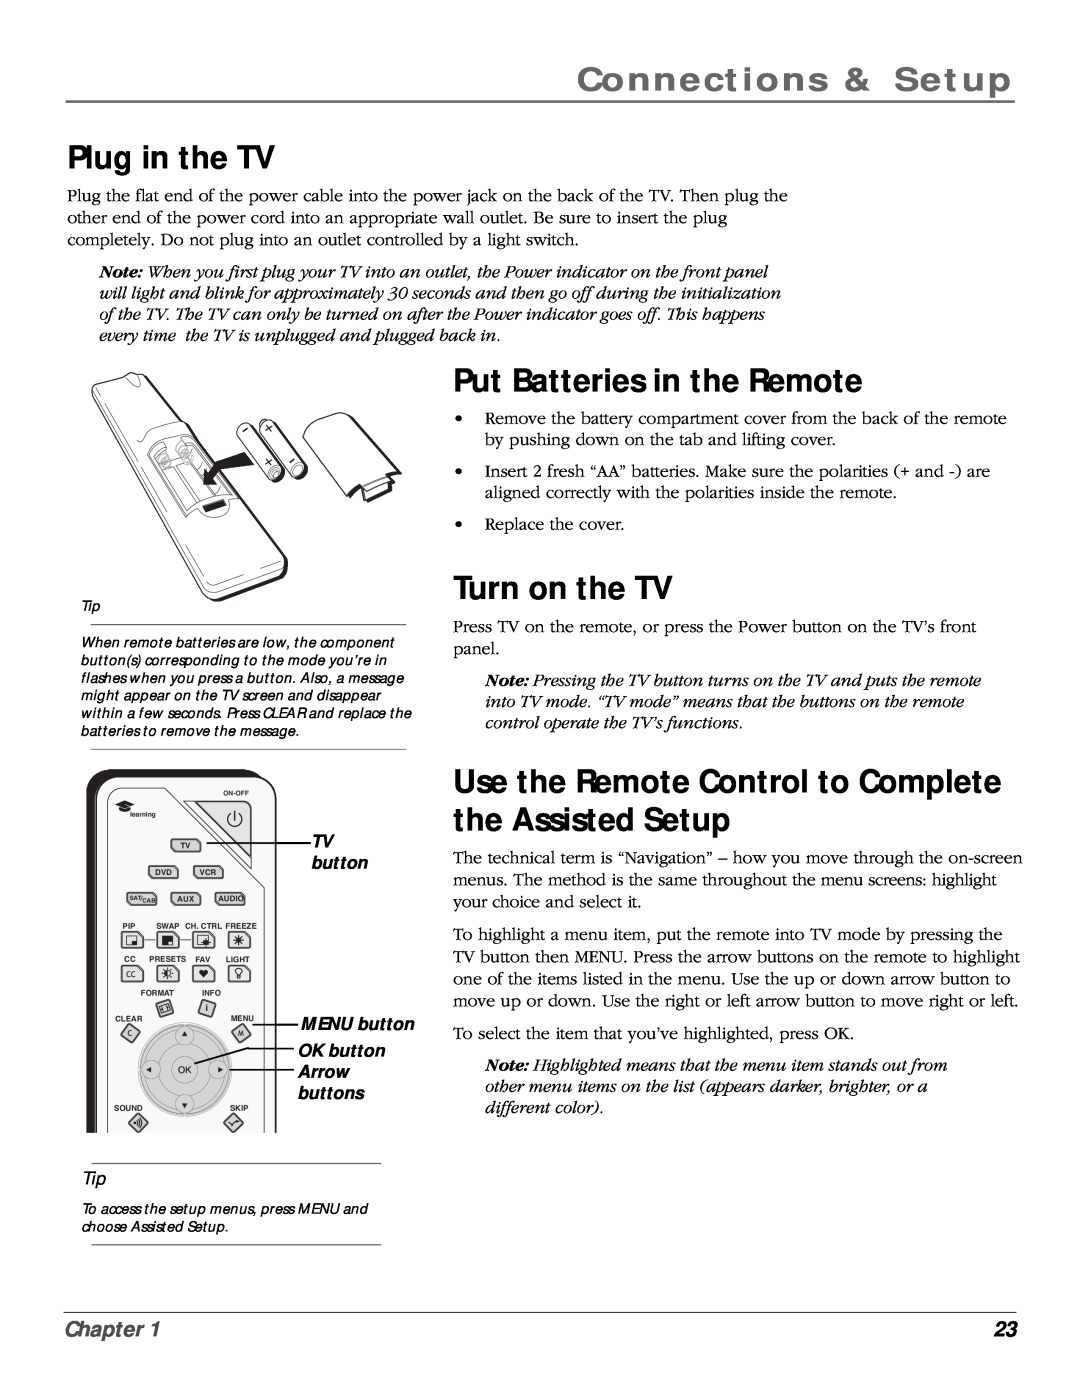 RCA scenium Plug in the TV, Put Batteries in the Remote, Turn on the TV, MENU button, OK button Arrow buttons, Chapter 